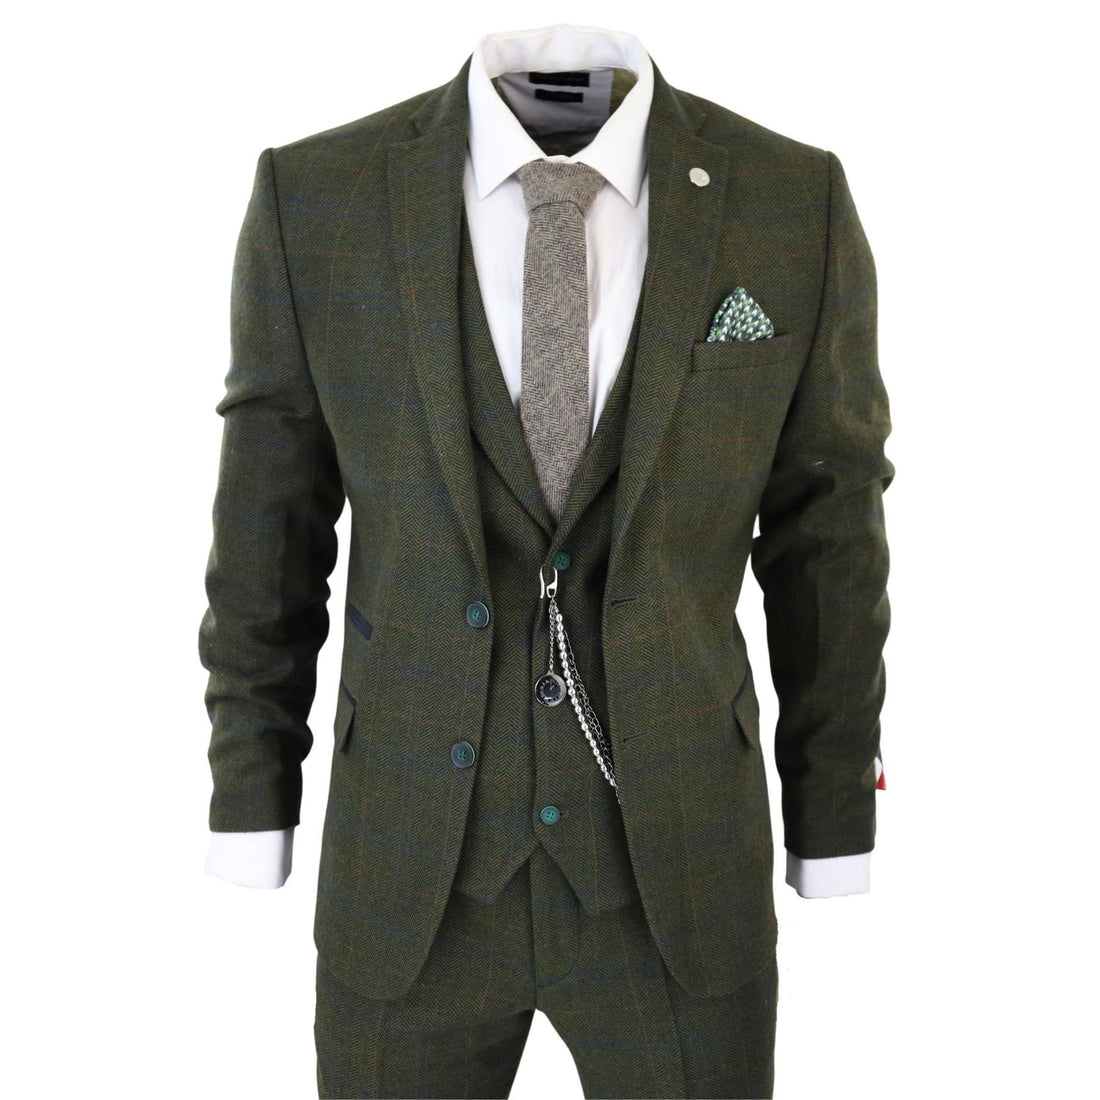 Men's 3 Piece Suit Wool Tweed Green Blue Brown Check 1920s Gatsby Formal Dress Suits - Knighthood Store